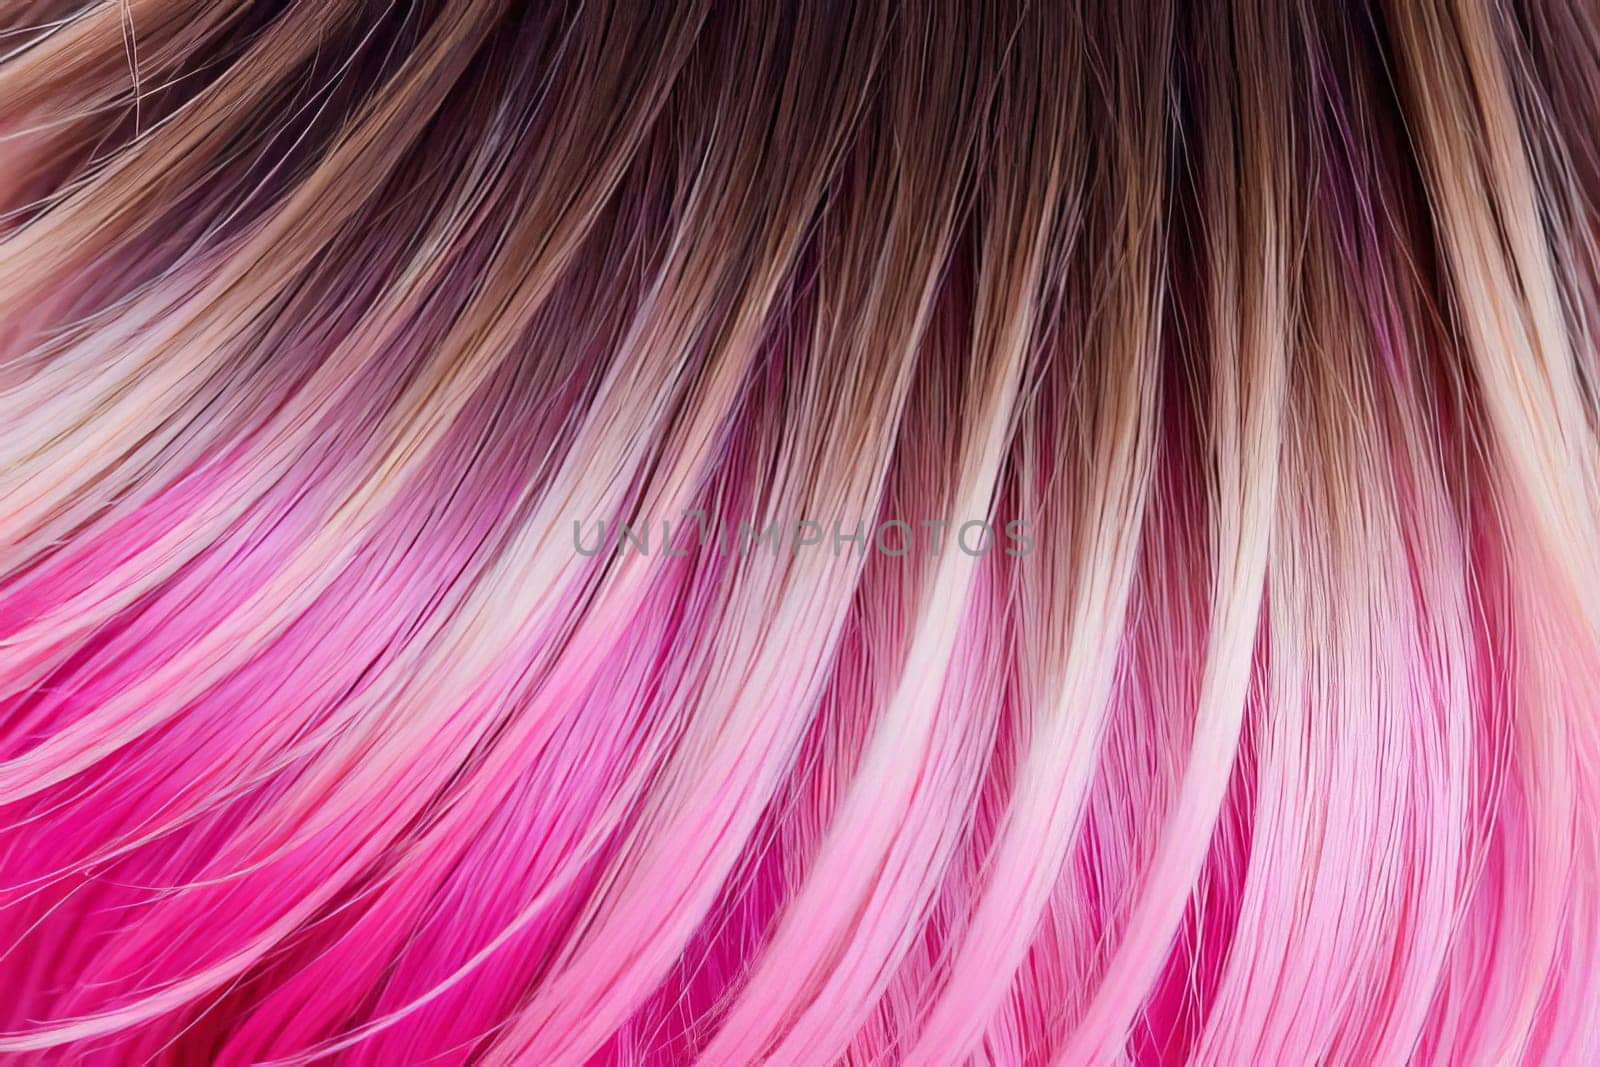 The picture portrays the luxurious beauty of pink hair in an ombre style, creating a visually striking and stylish composition